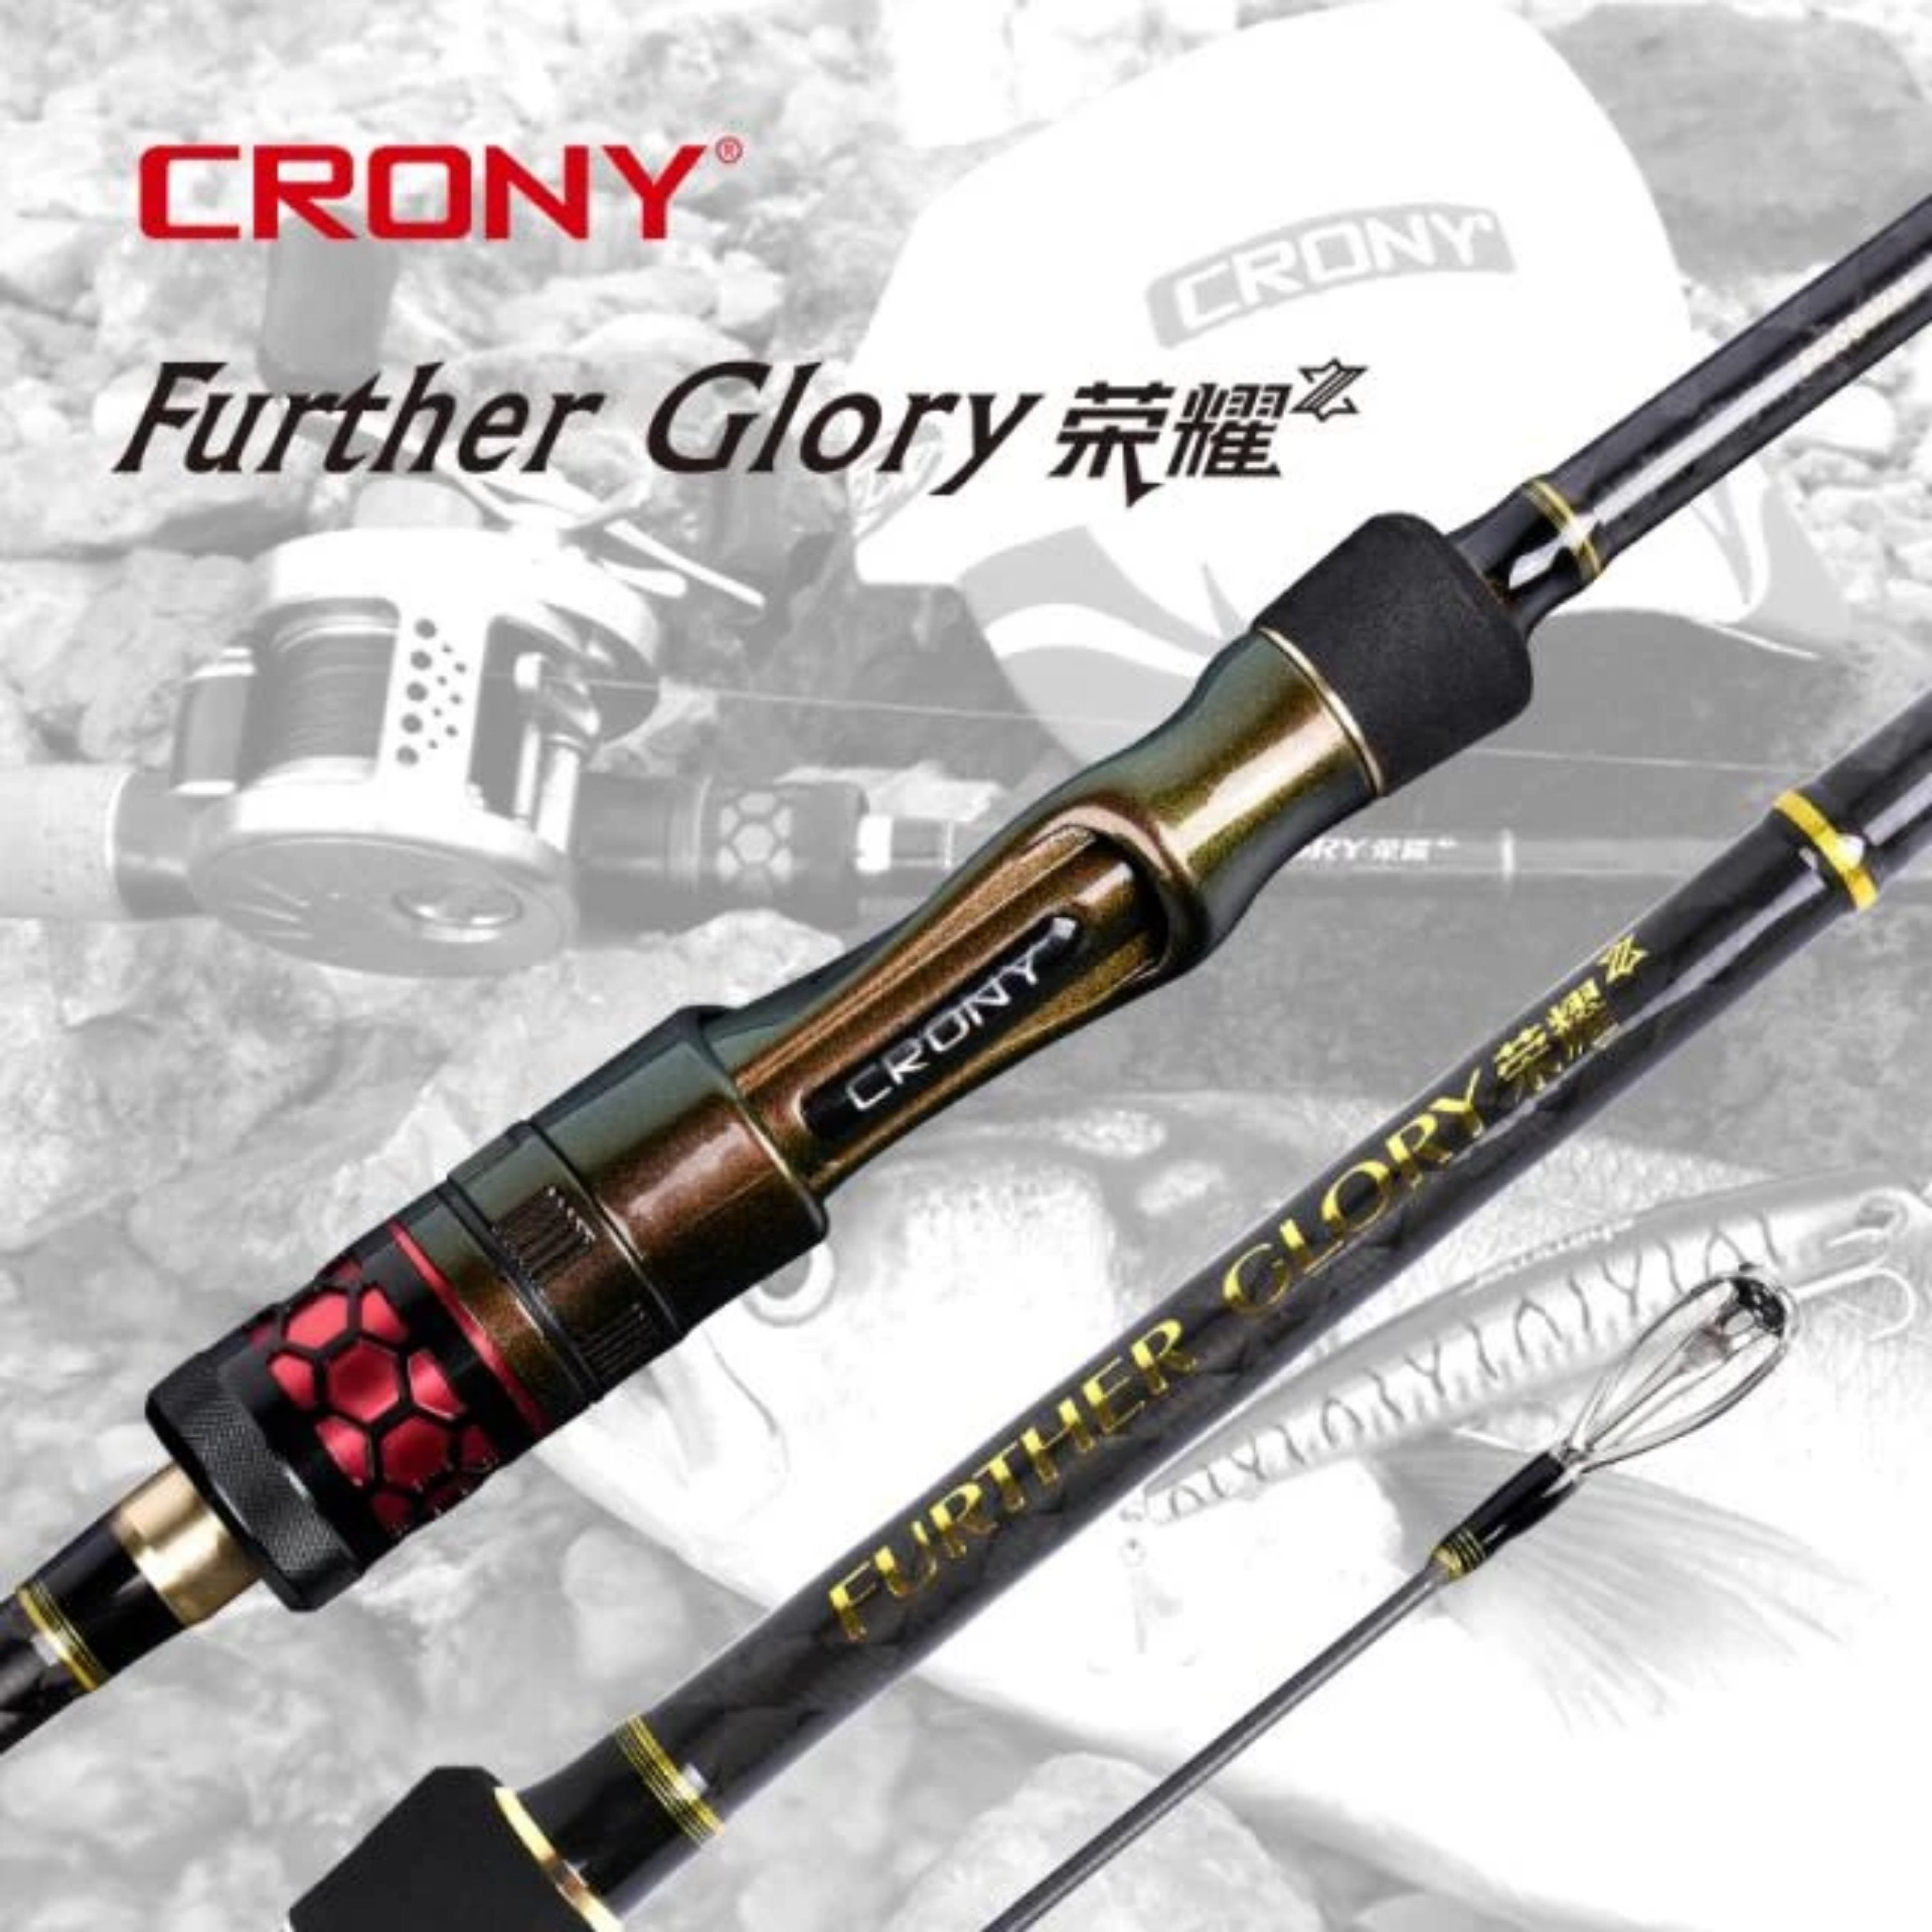 Fishing rod Crony Further Glory Spin/cast(Inside/Outside)